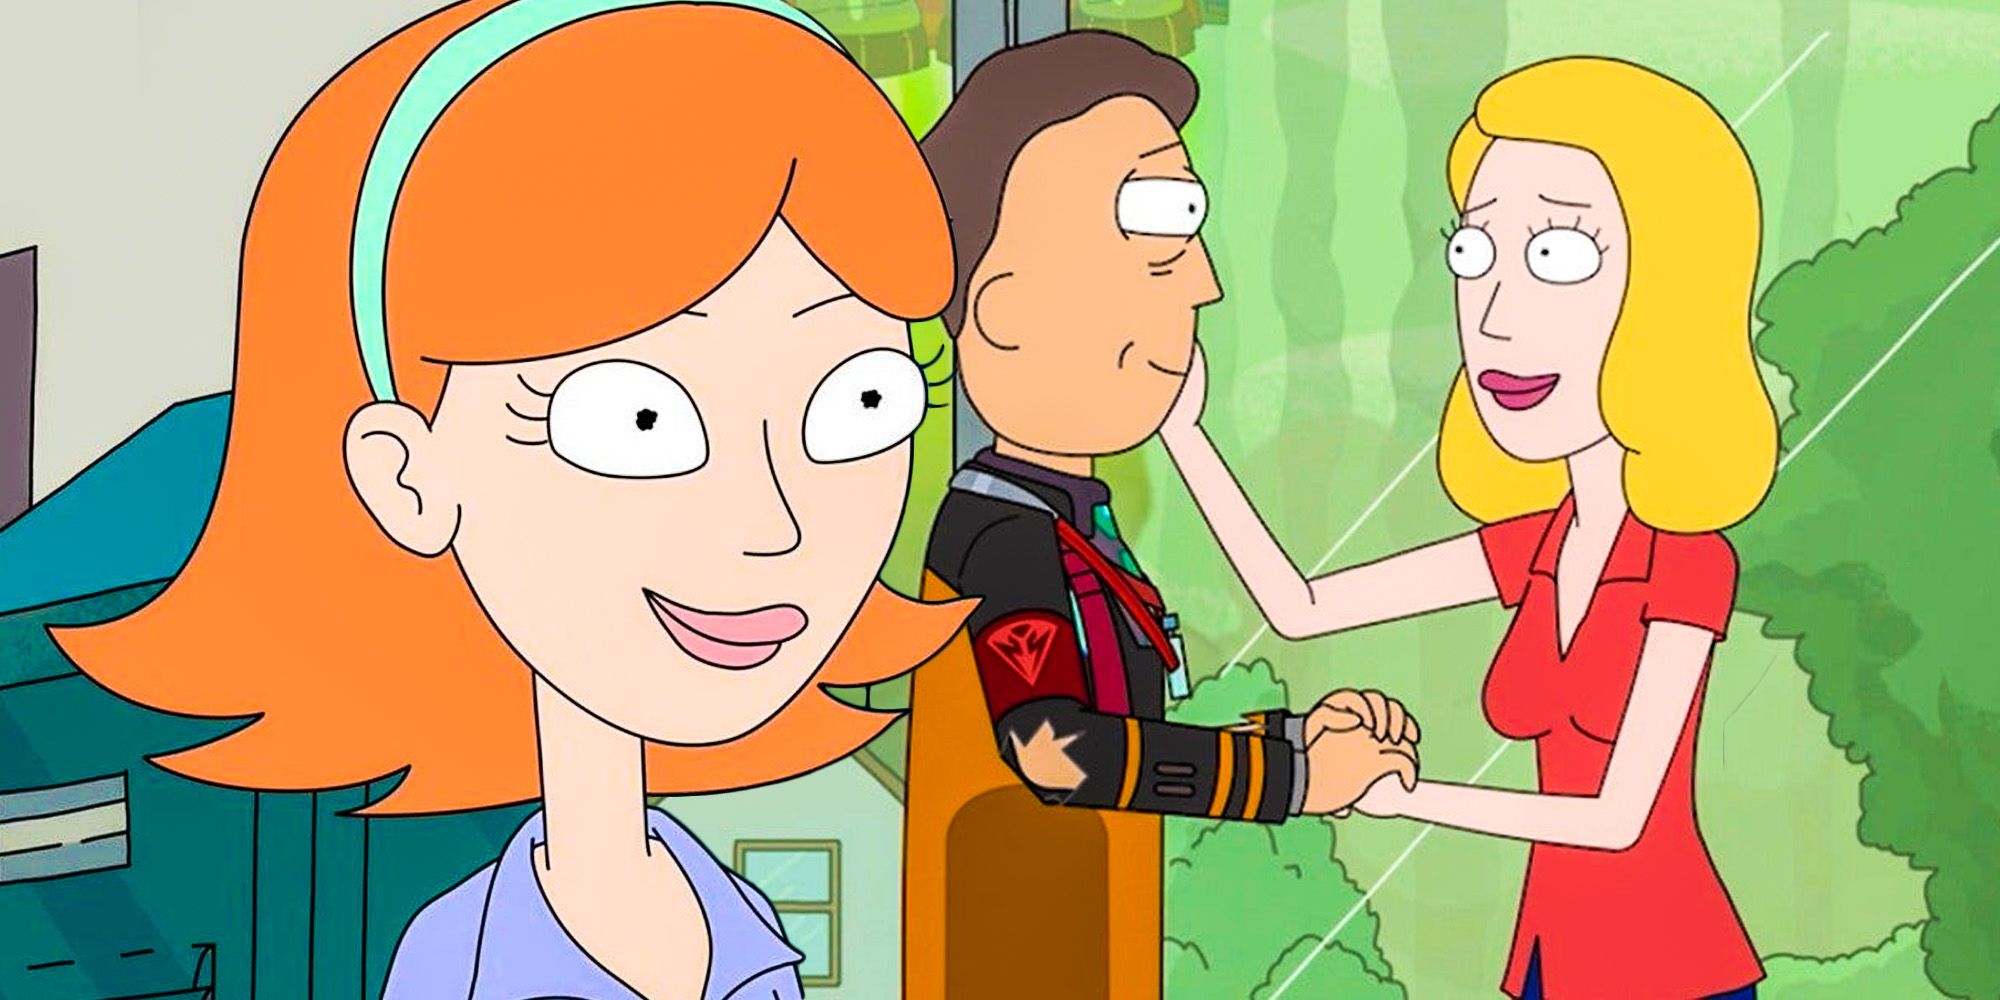 Rick and morty season 5 fixes jessica Beth and Jerry